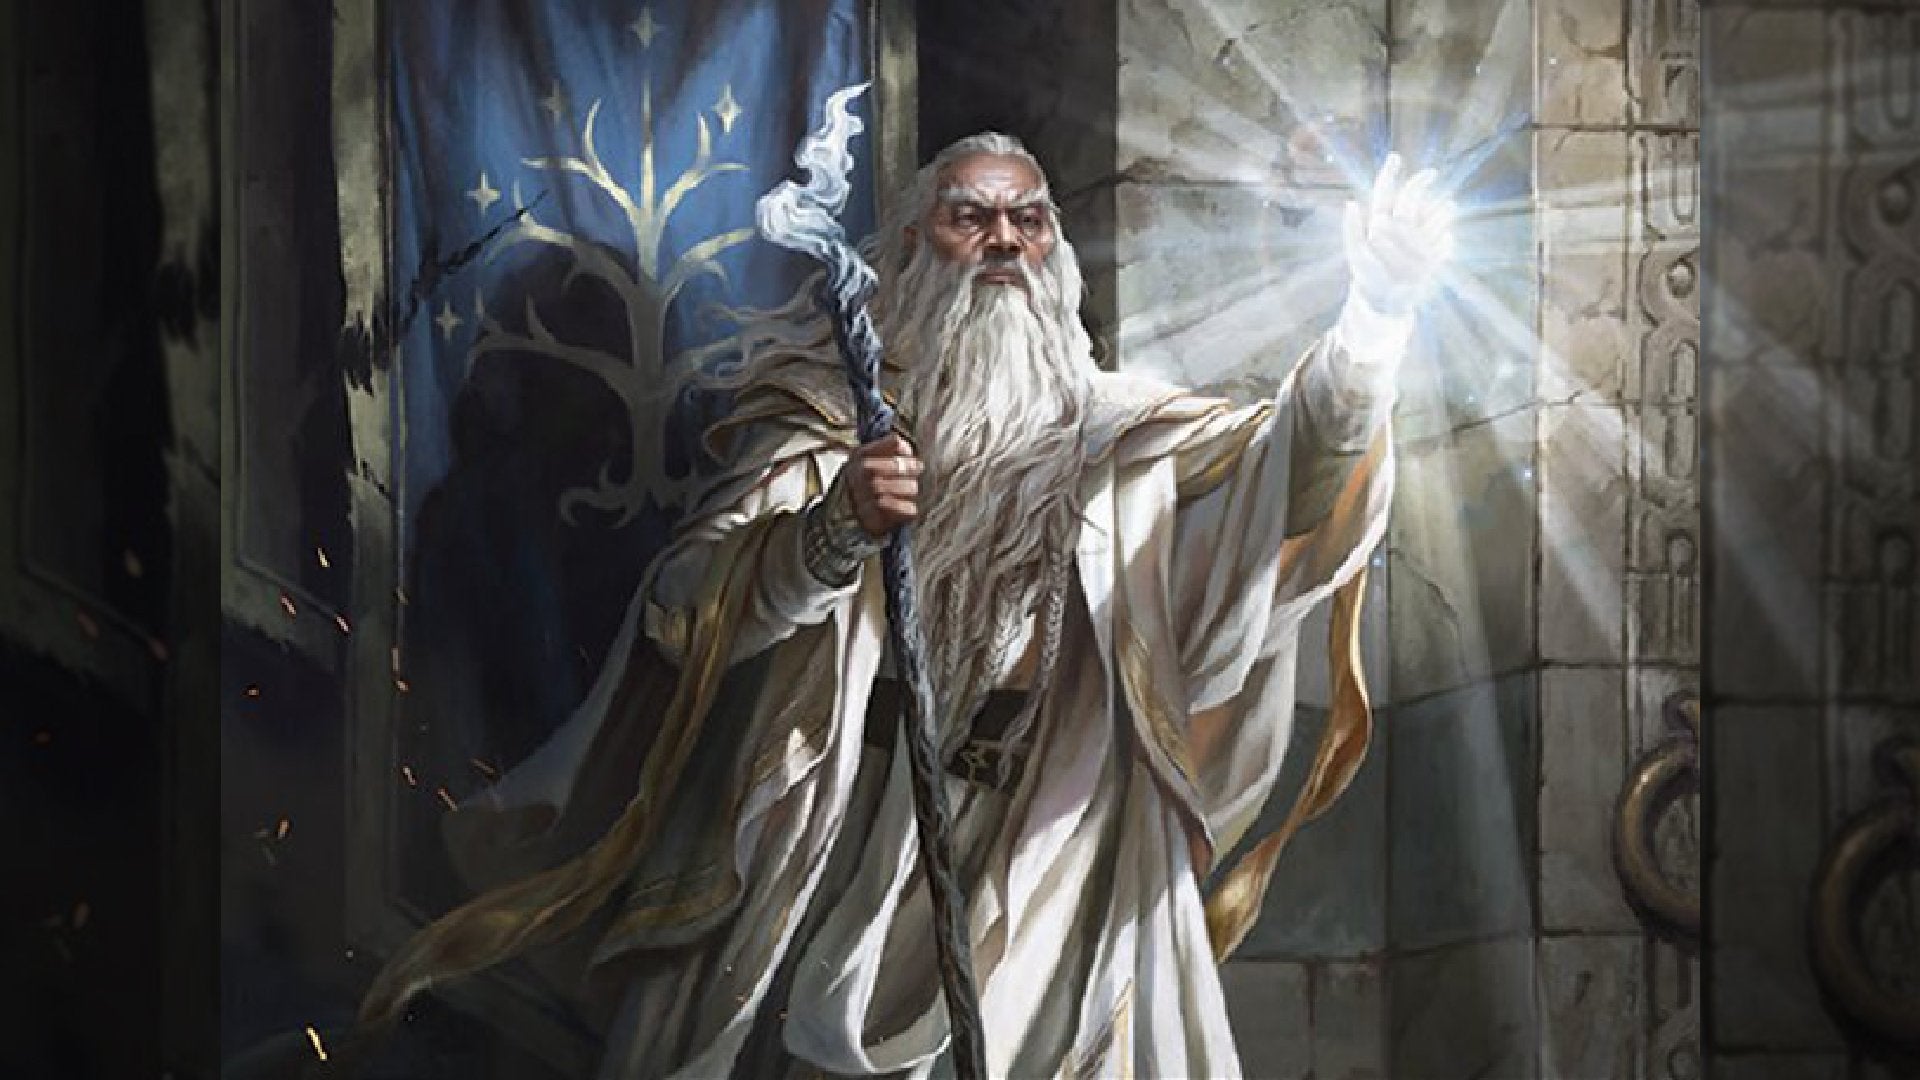 Art from the Gandalf the White MTG card showing the white wizard creating light with his hand.